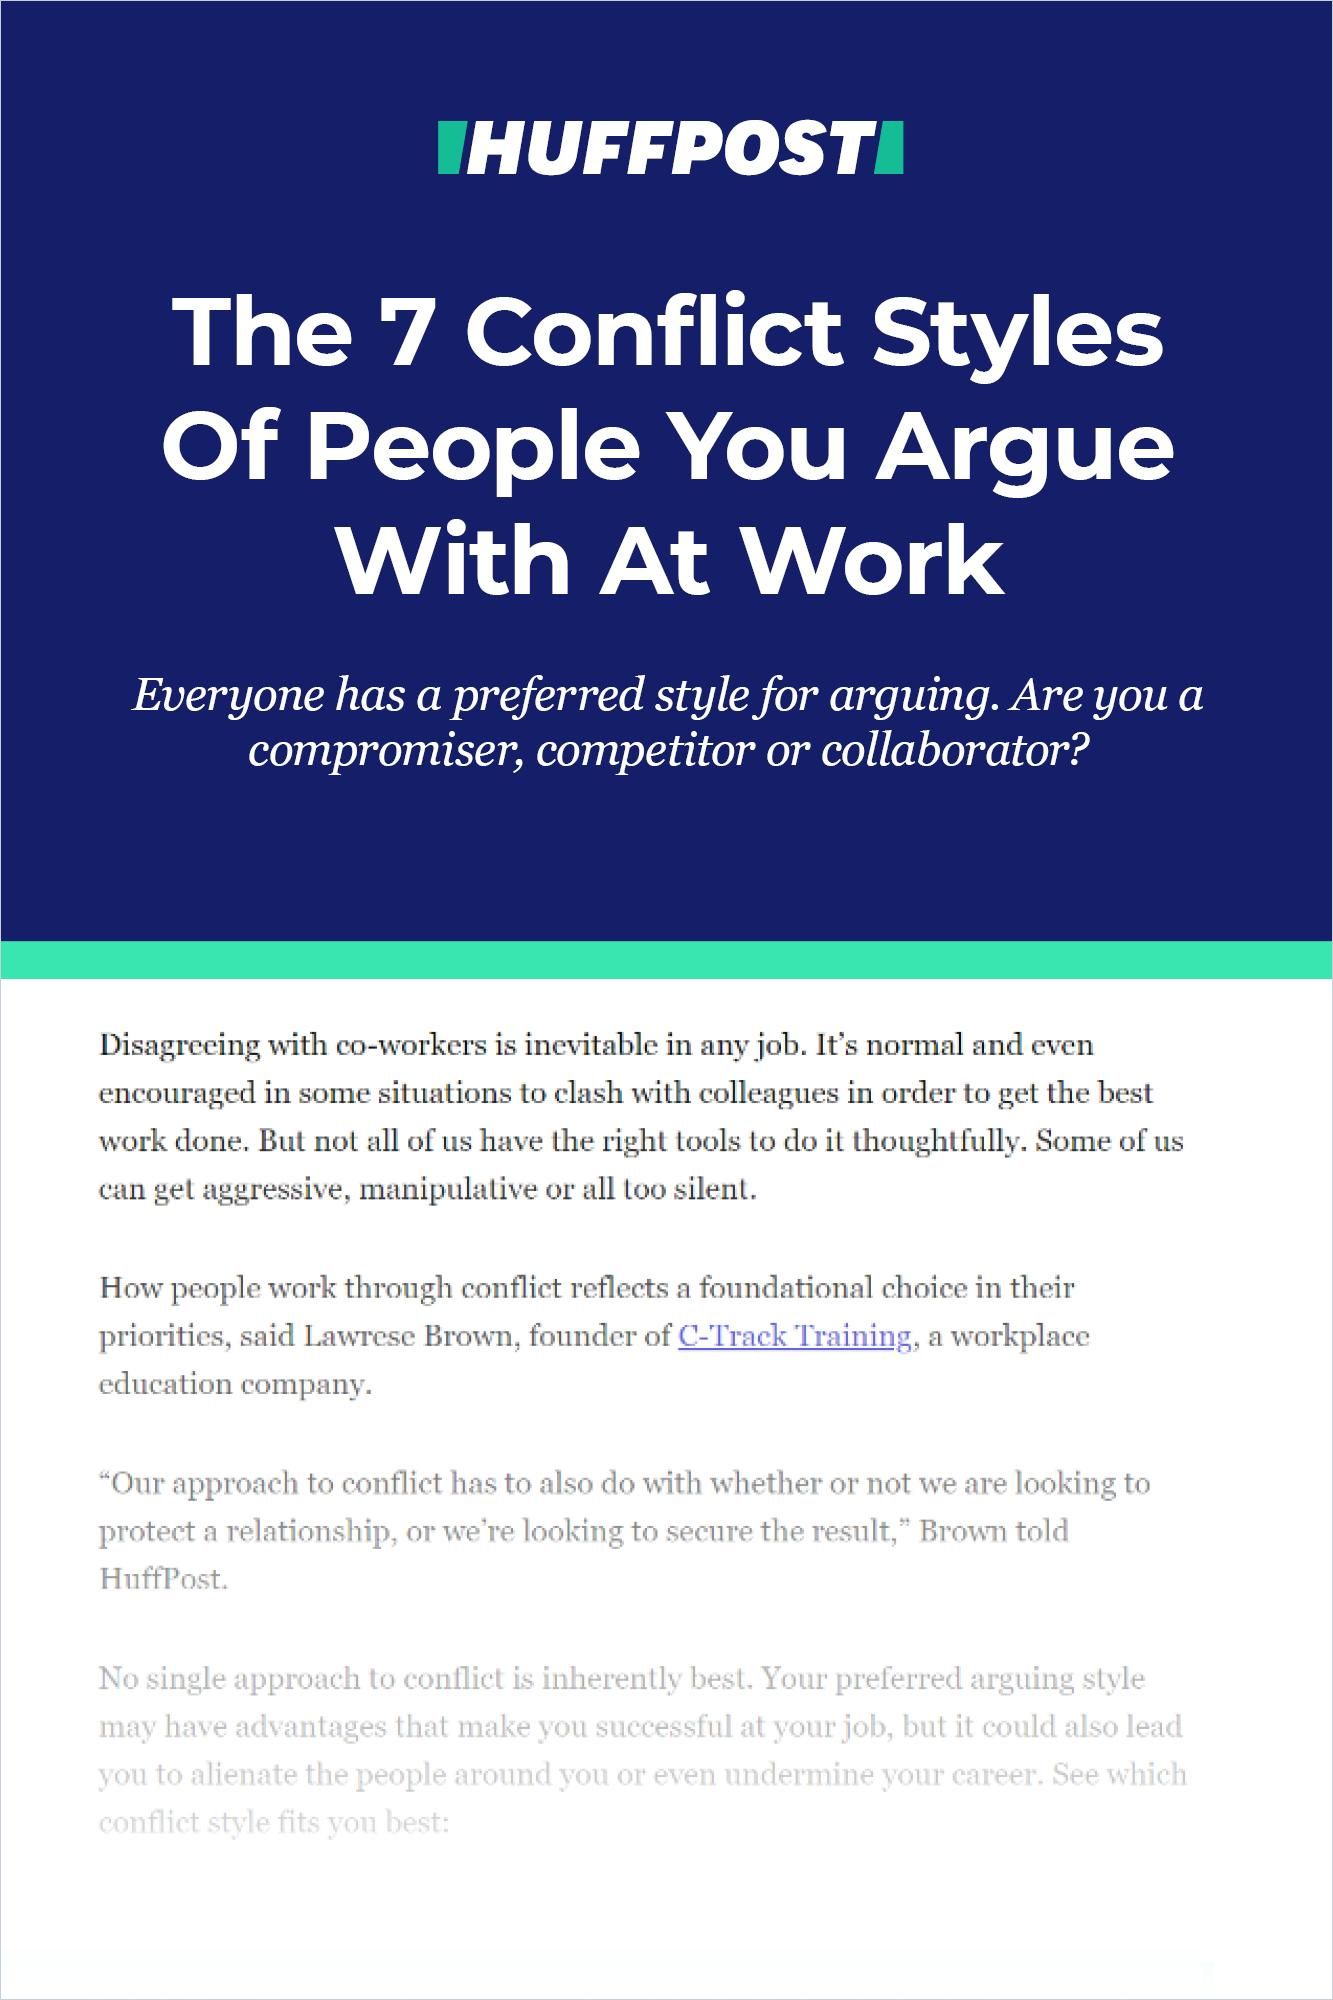 Image of: The Seven Conflict Styles of People You Argue with at Work